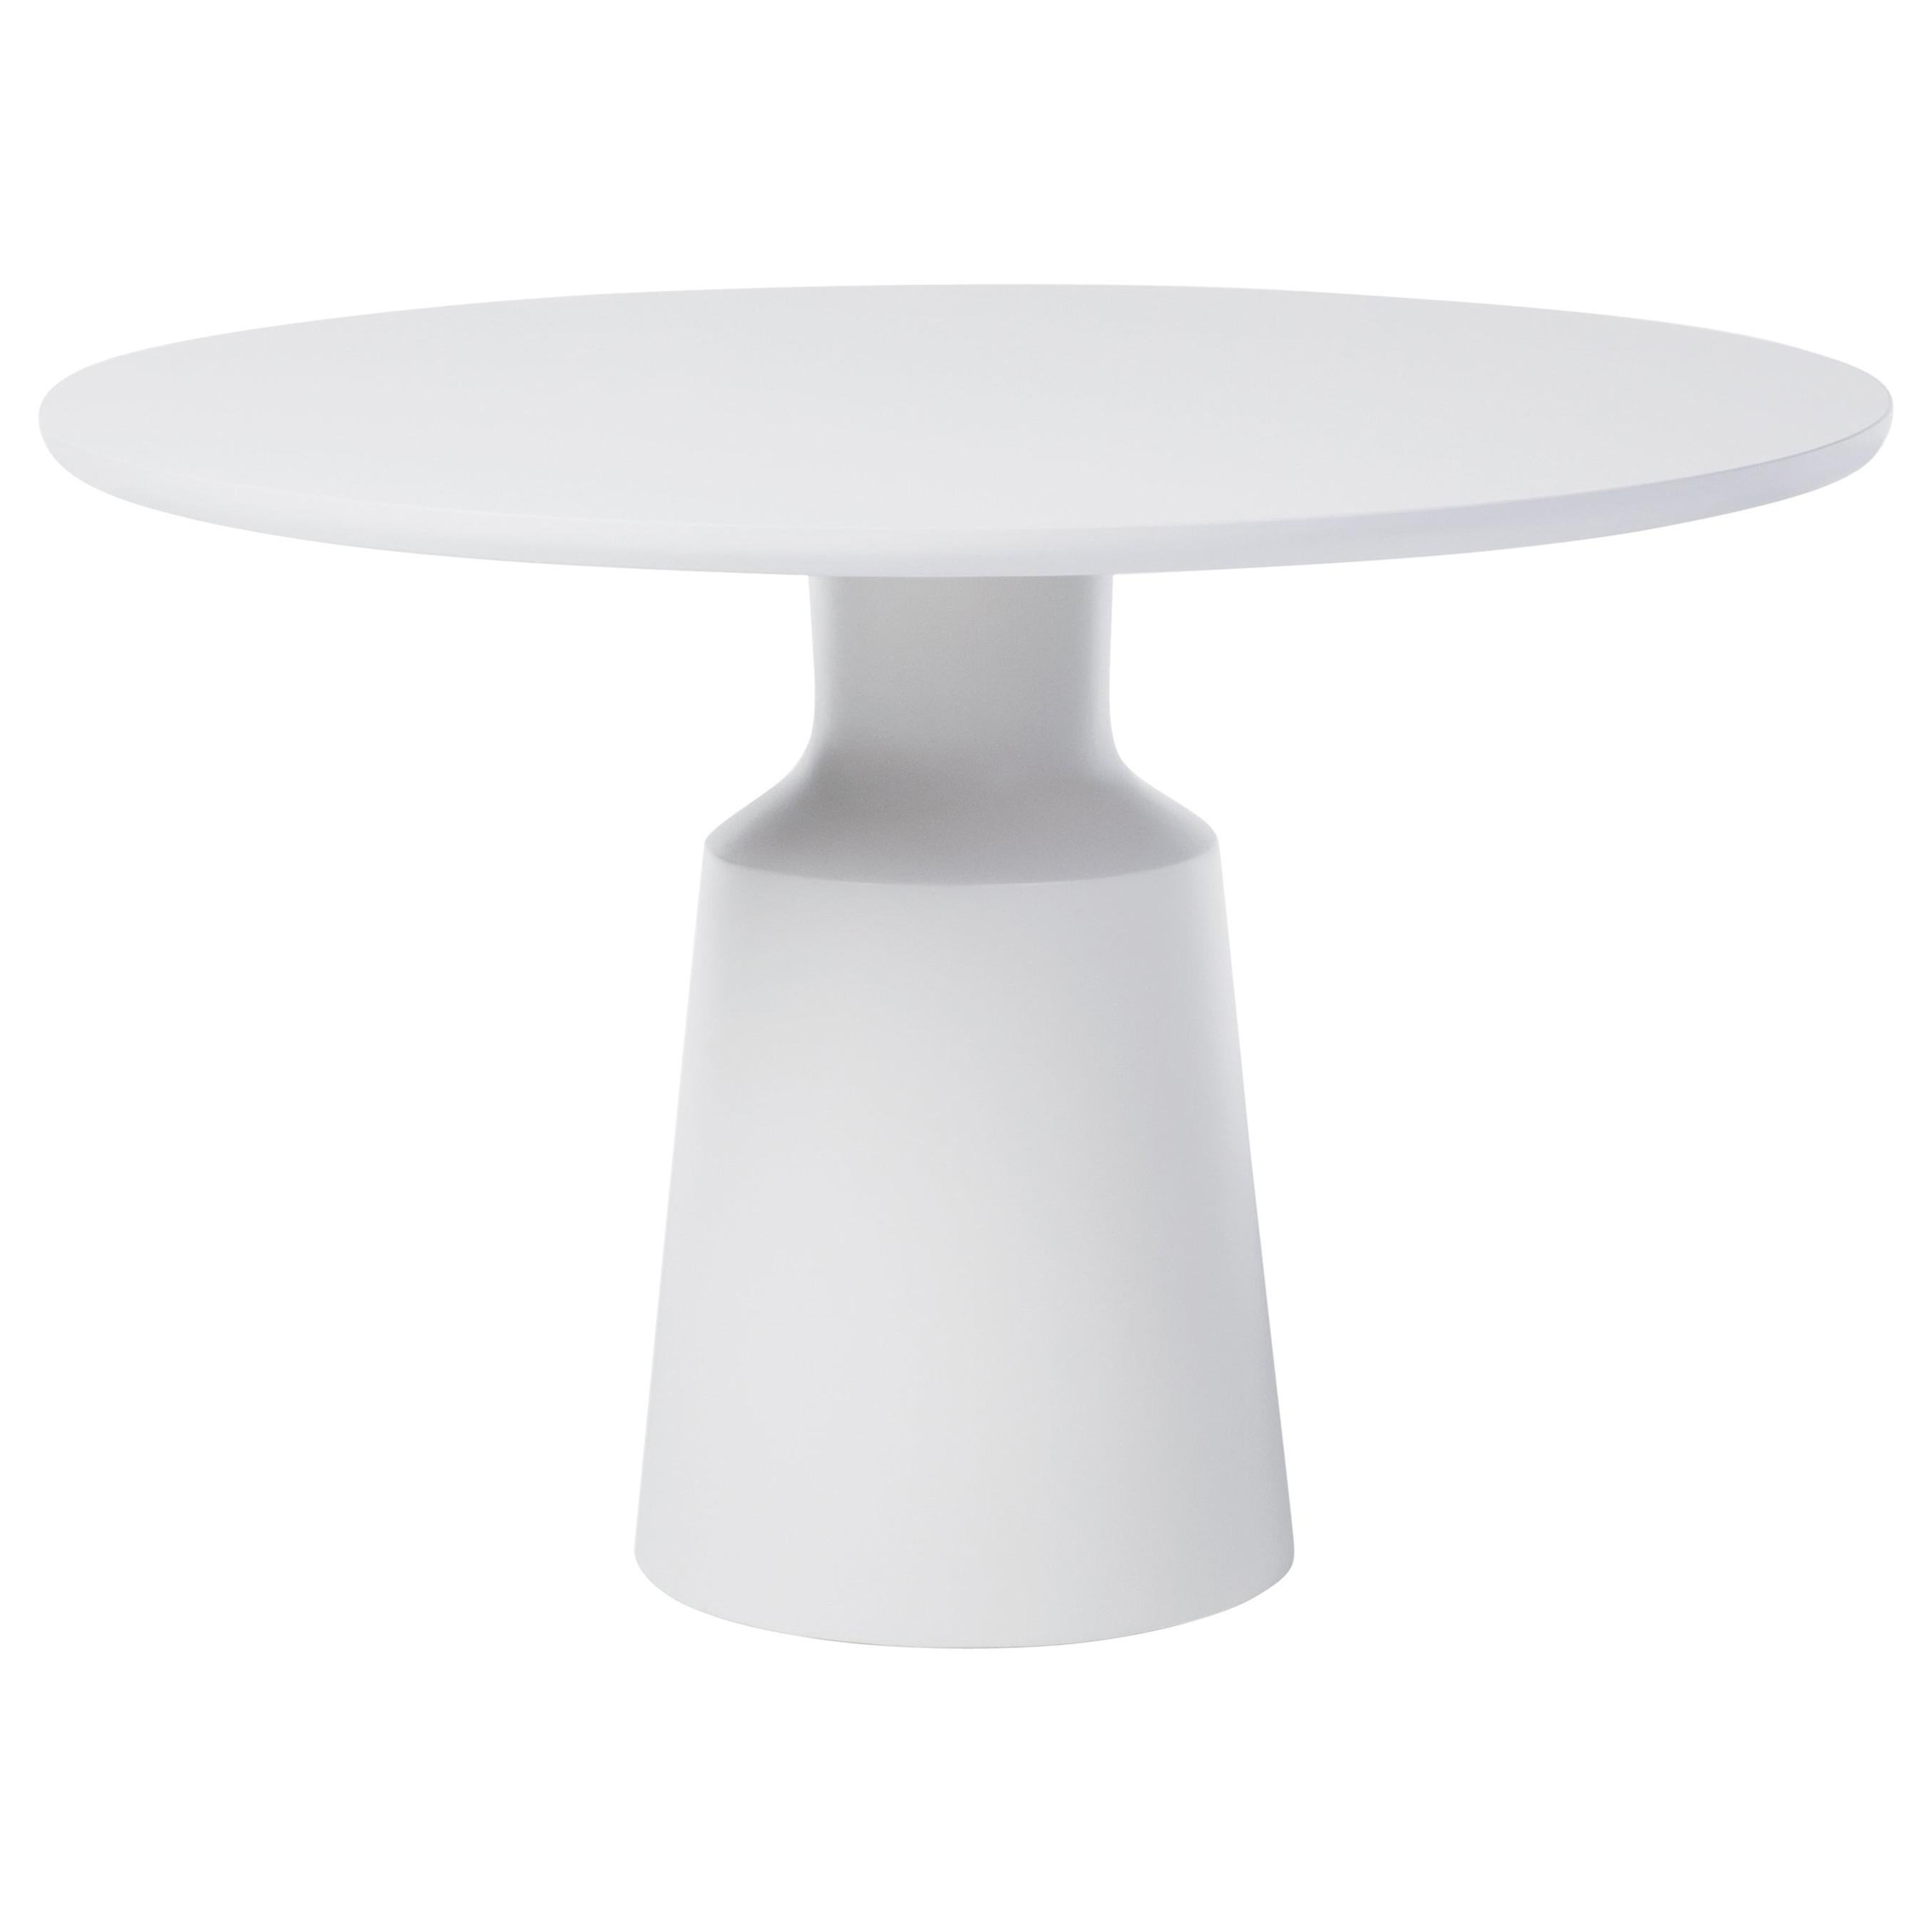 HOLLY HUNT Outdoor Peso Dining Table in Polar White Base & Pure White Top